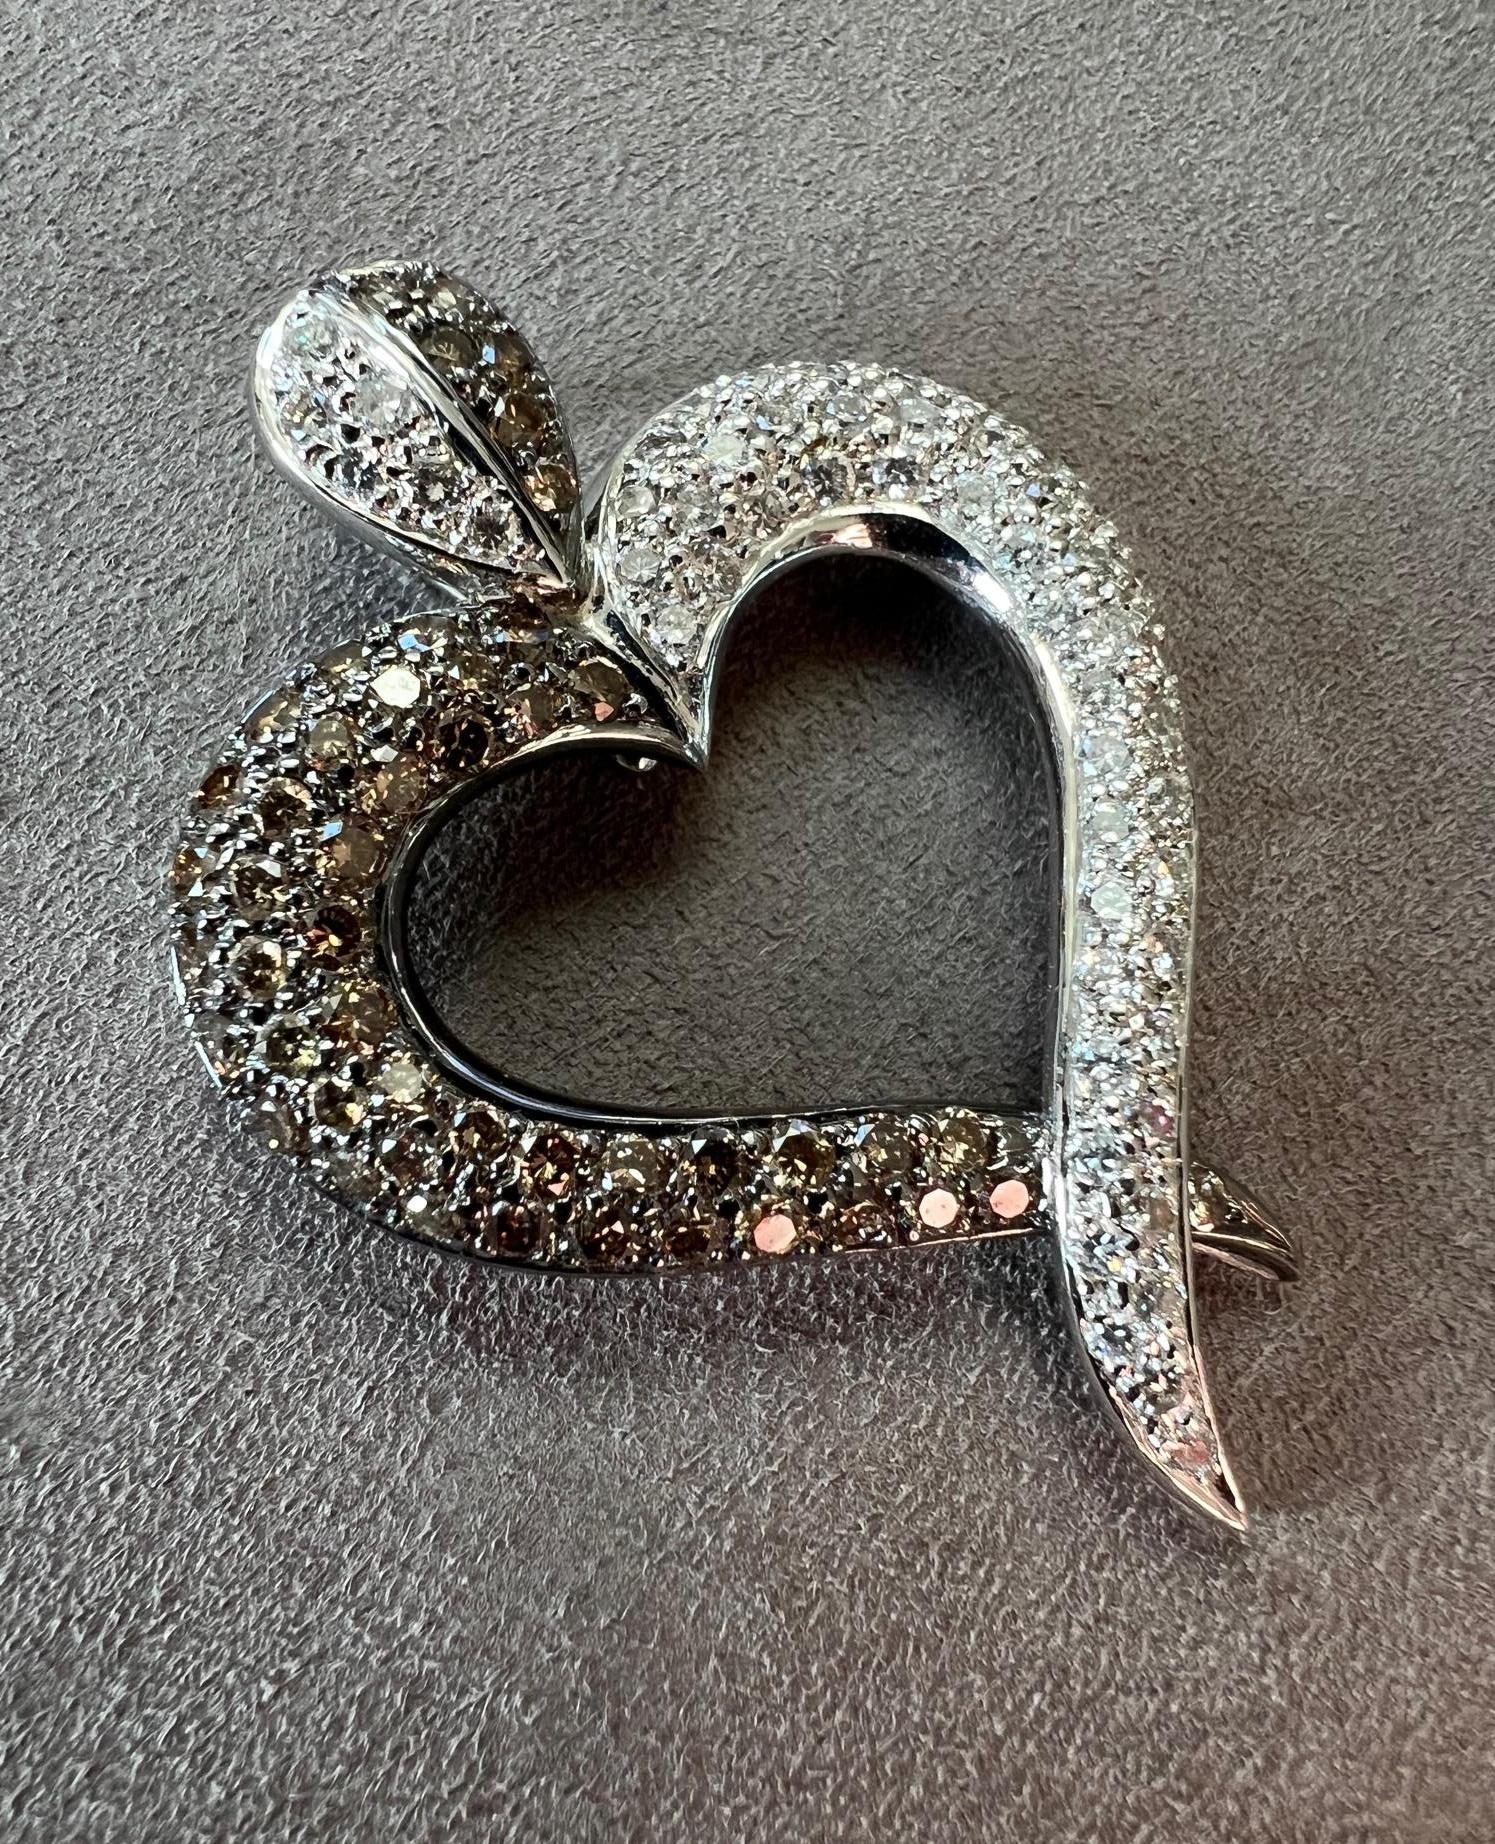 Large detachable white gold and diamond pendant.  This heart shaped design is made in 18k white gold with two different colored diamond sides.  One with white diamonds and the other with bright cognac diamonds. The top bail of the pendant has a